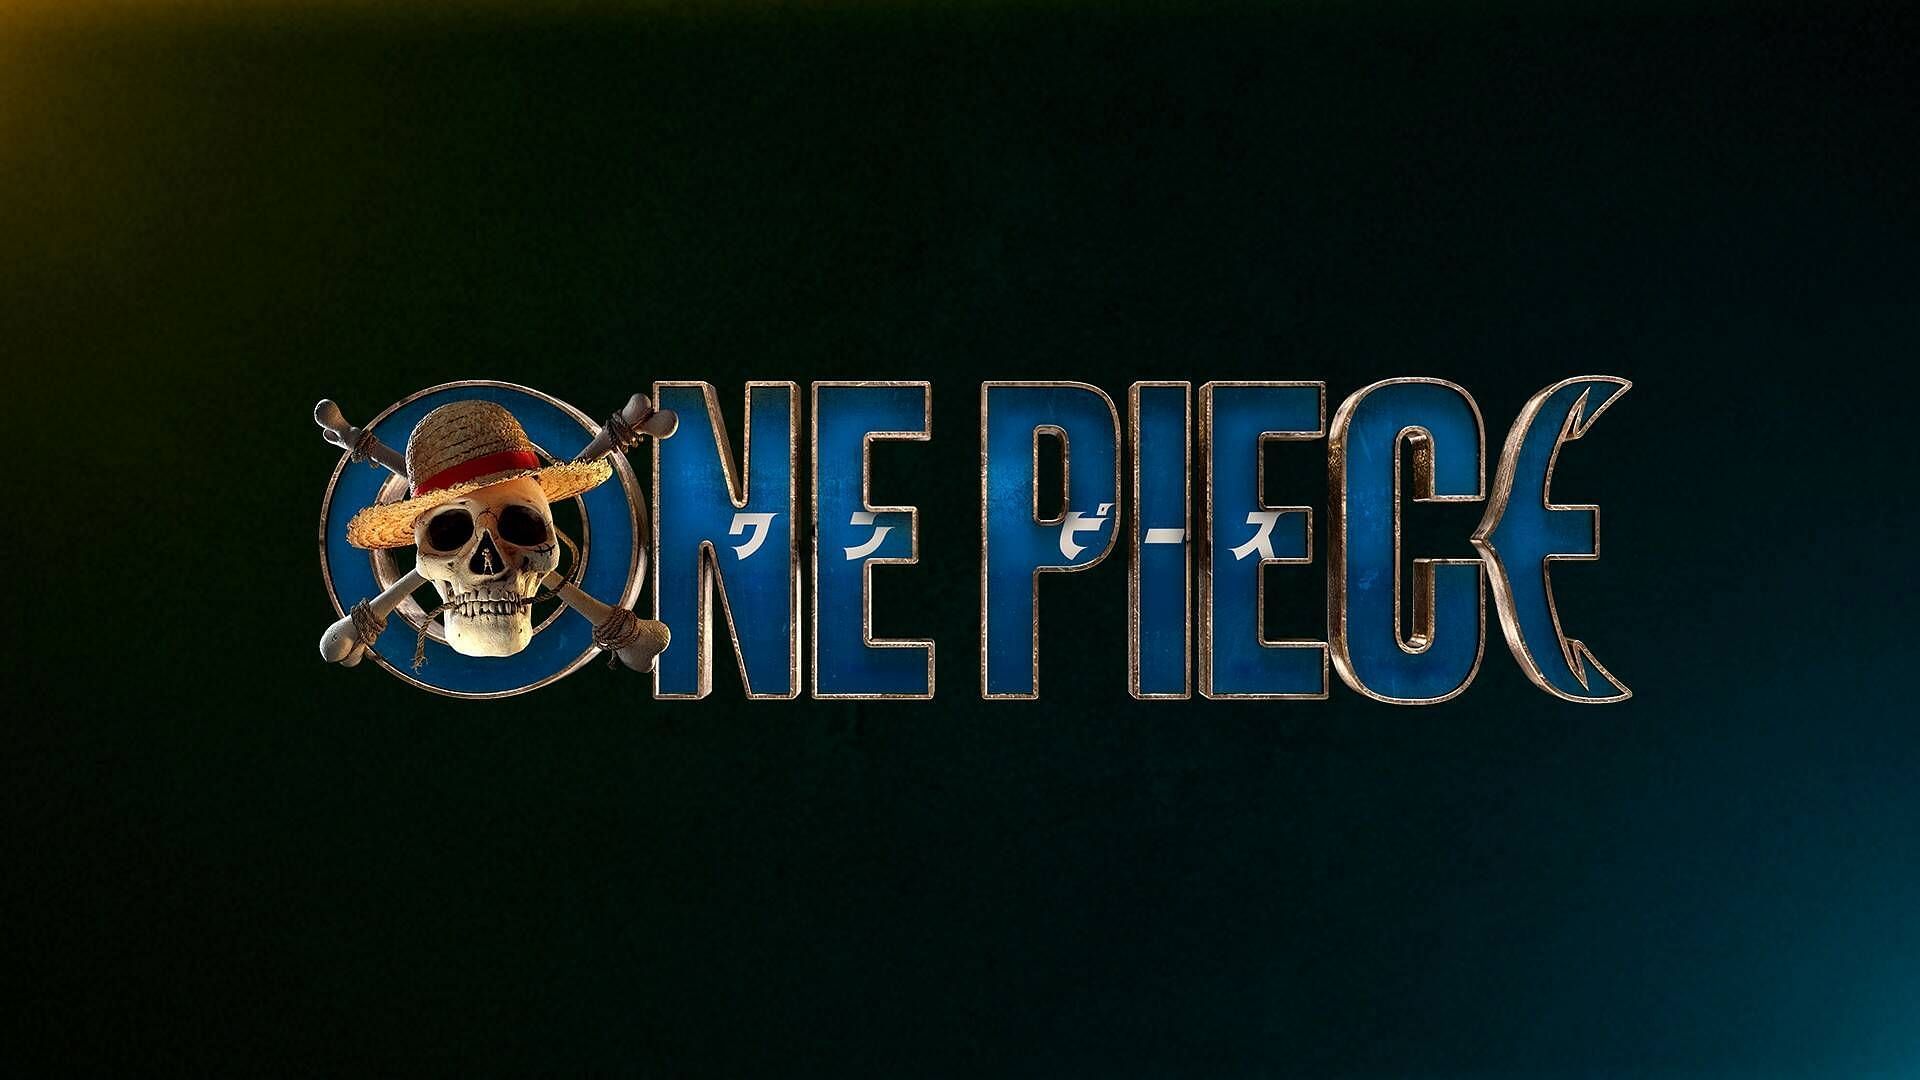 The logo of One Piece